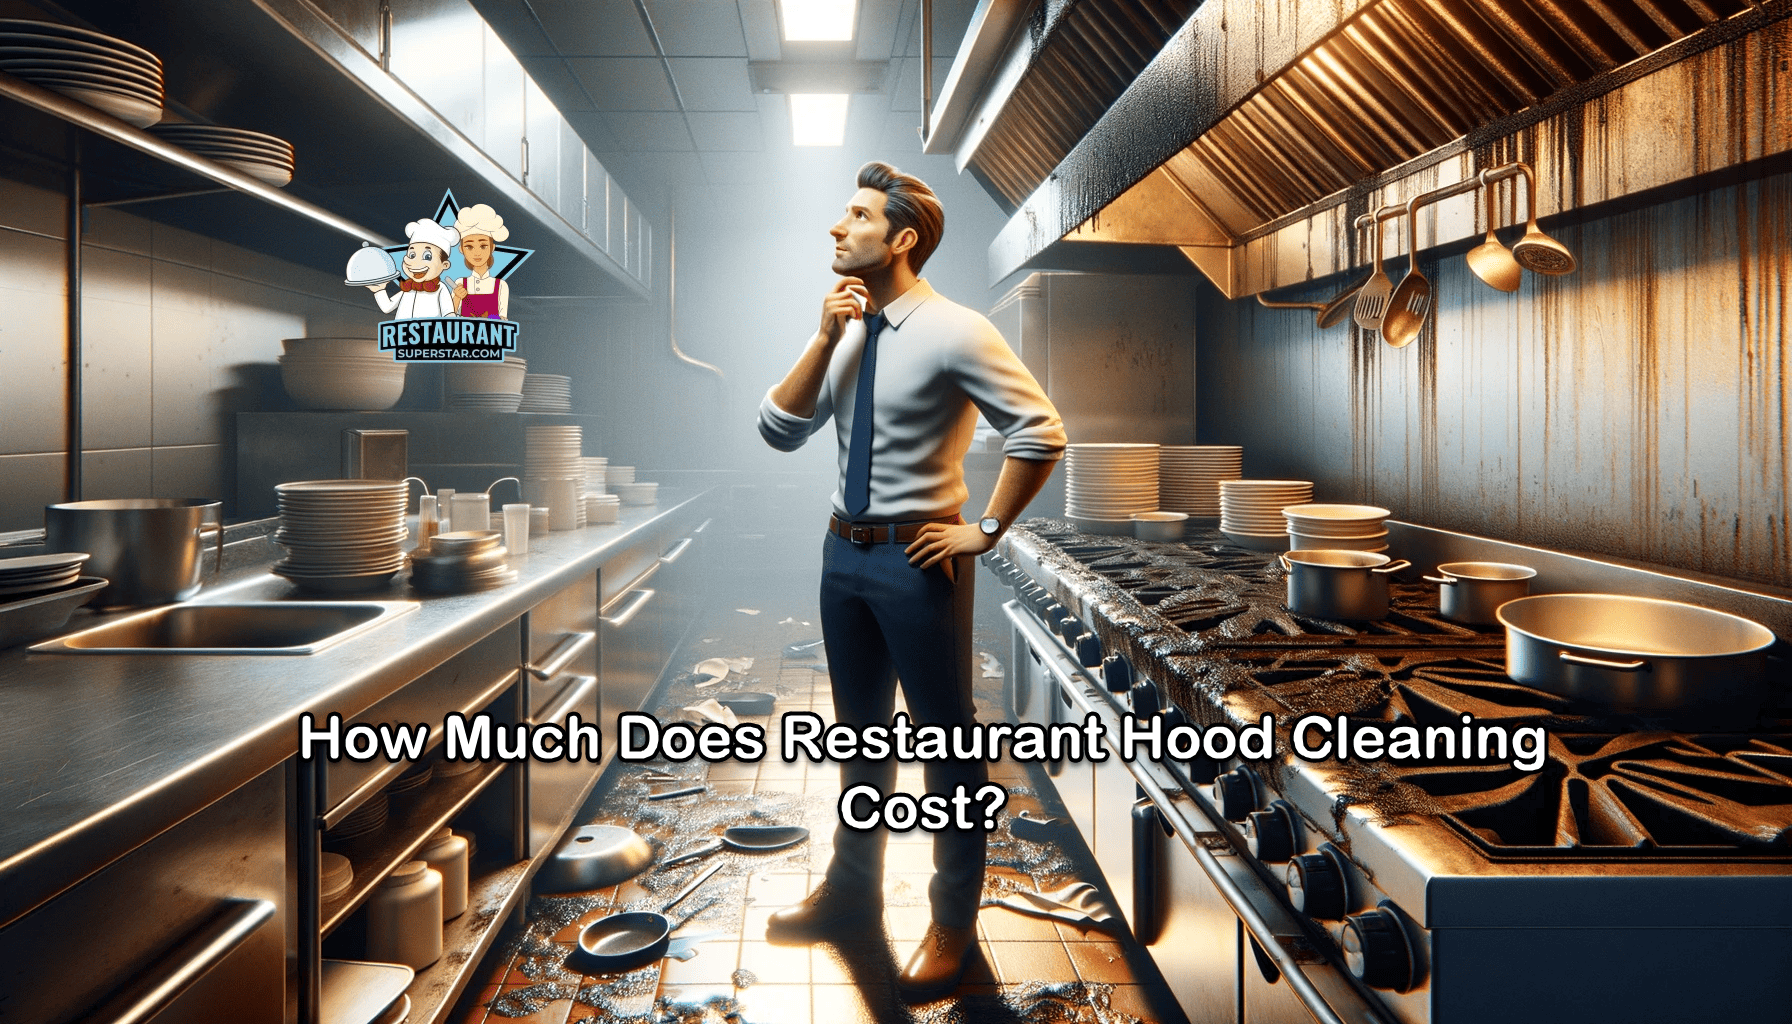 How Much Does Restaurant Hood Cleaning Cost?